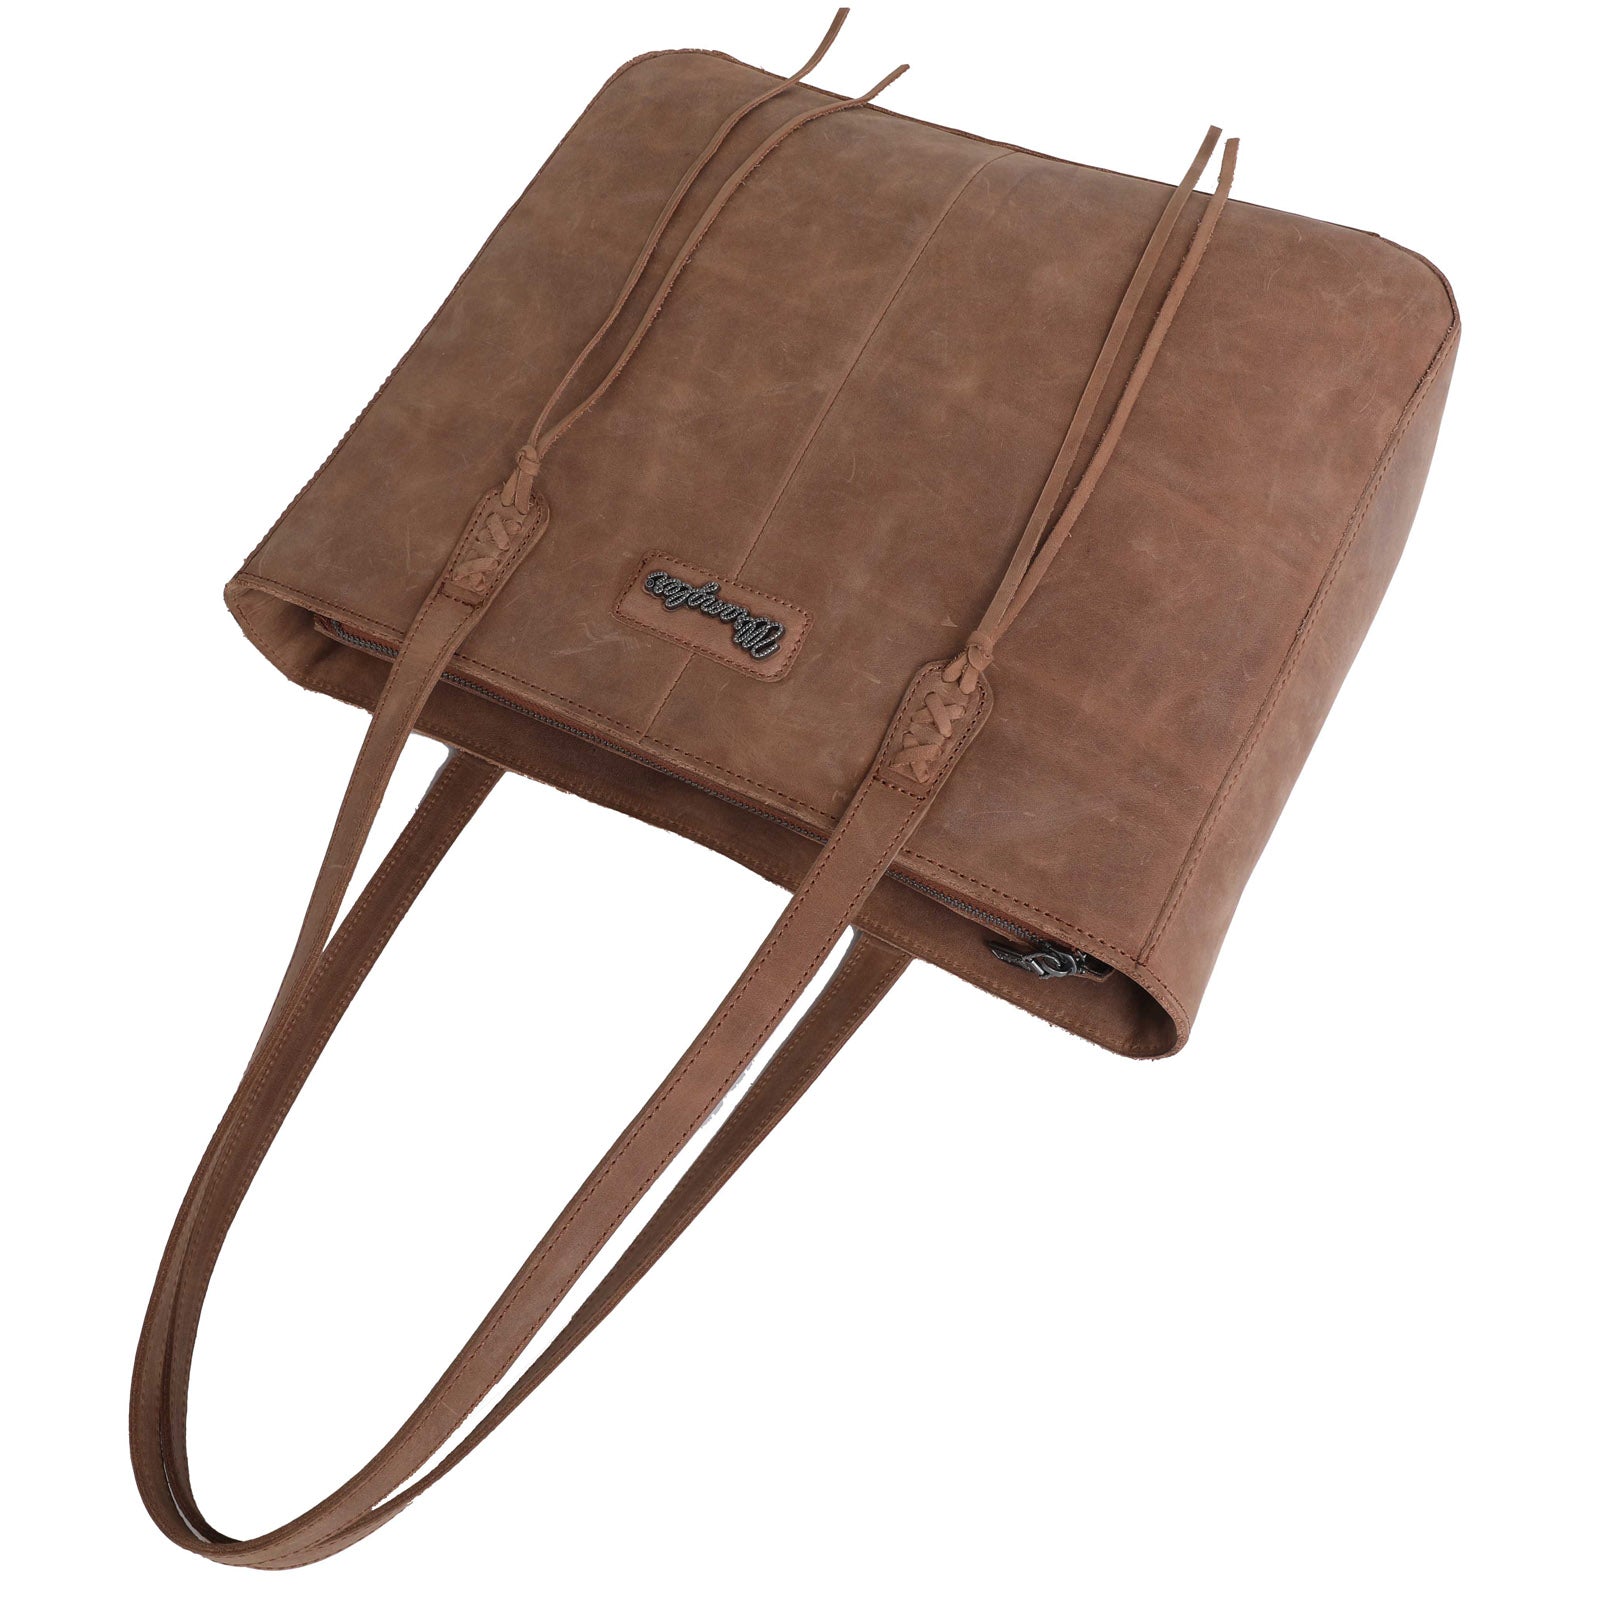 Wrangler Full Distressed Leather Concealed Carry Tote with Detachable Crossbody Bag Brown